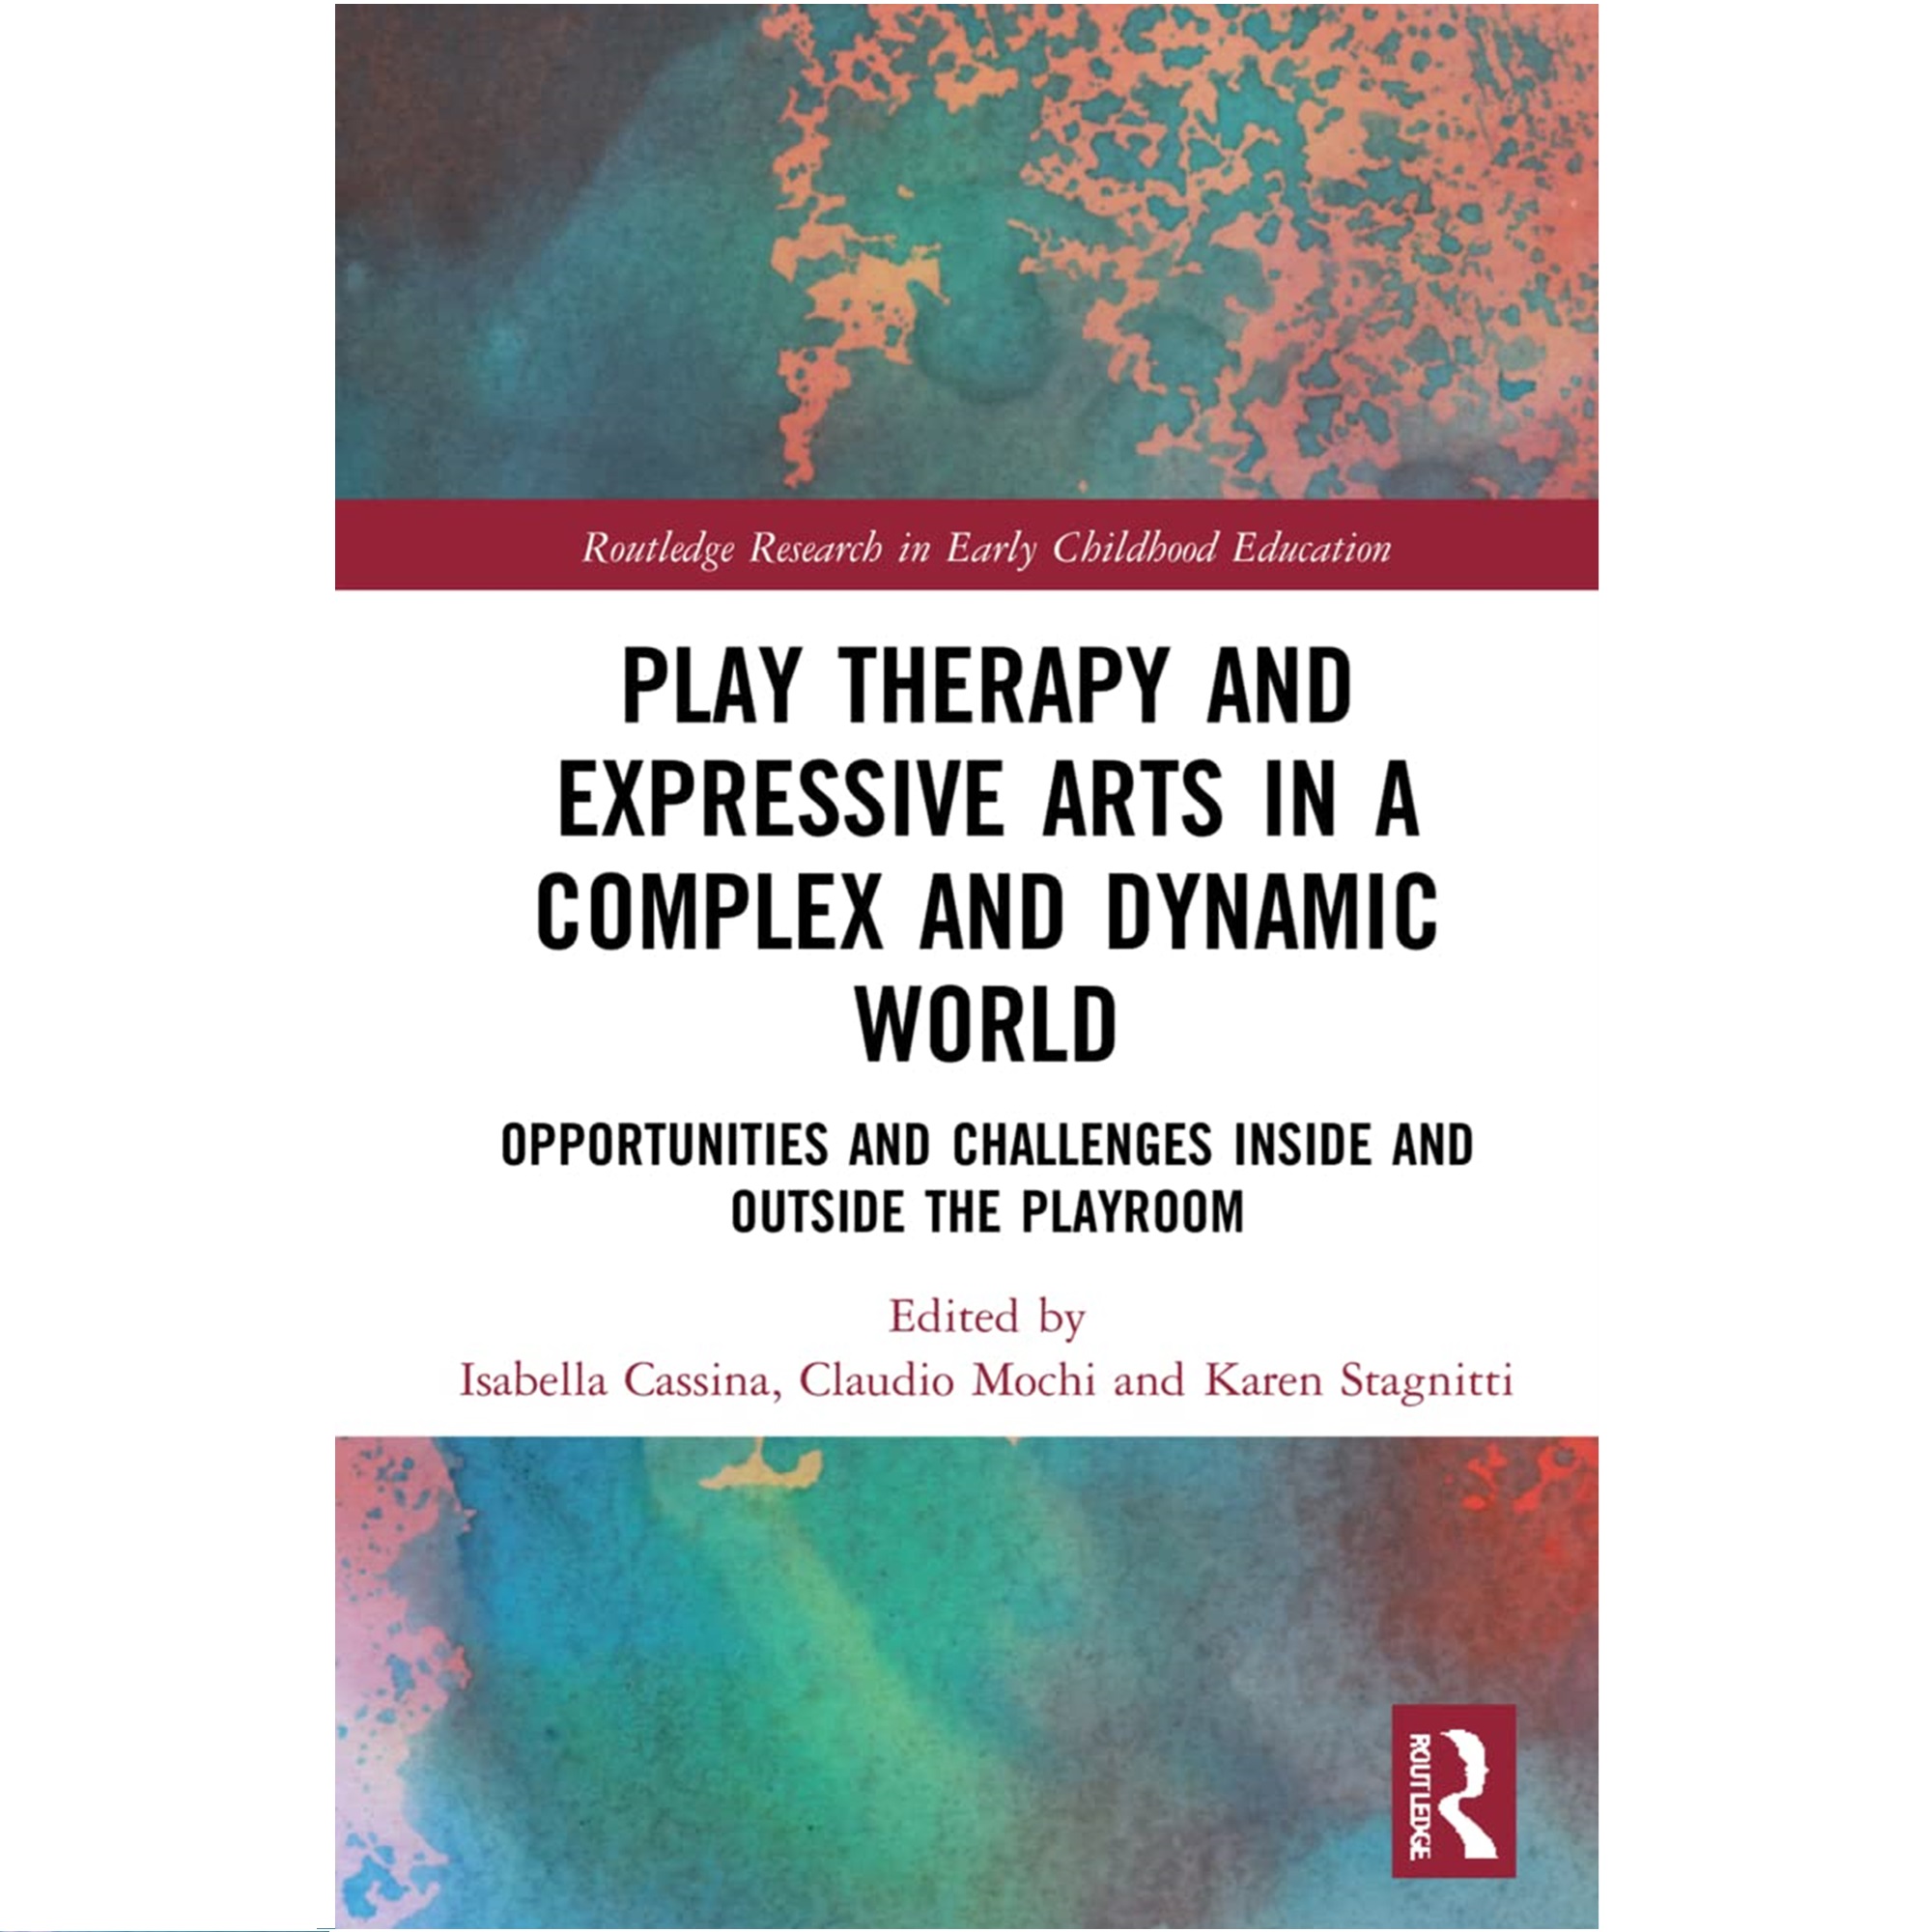 Play-Therapy-and-Expressive-Arts-in-a-Complex-and-Dynamic-World-Edited-by-Isabella-Cassina-Claudio-Mochi-Karen-Stagnitti